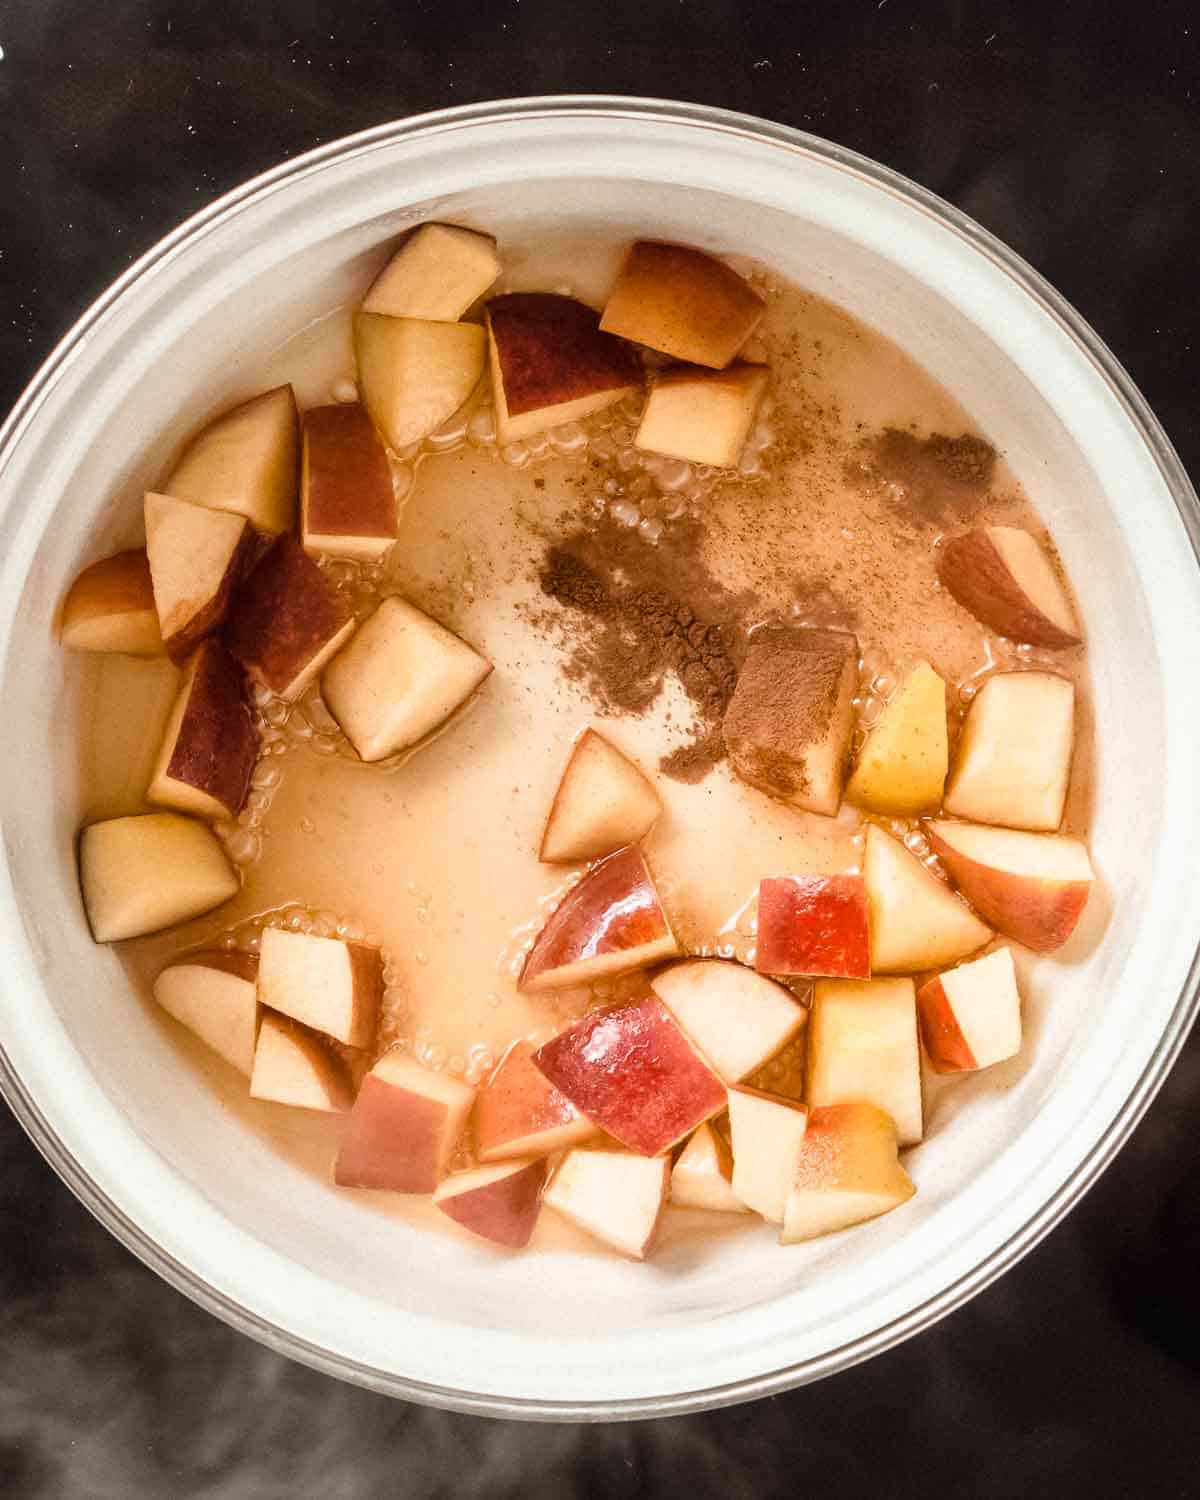 diced apples, cinnamon, maple syrup and water simmering in a saucepan.